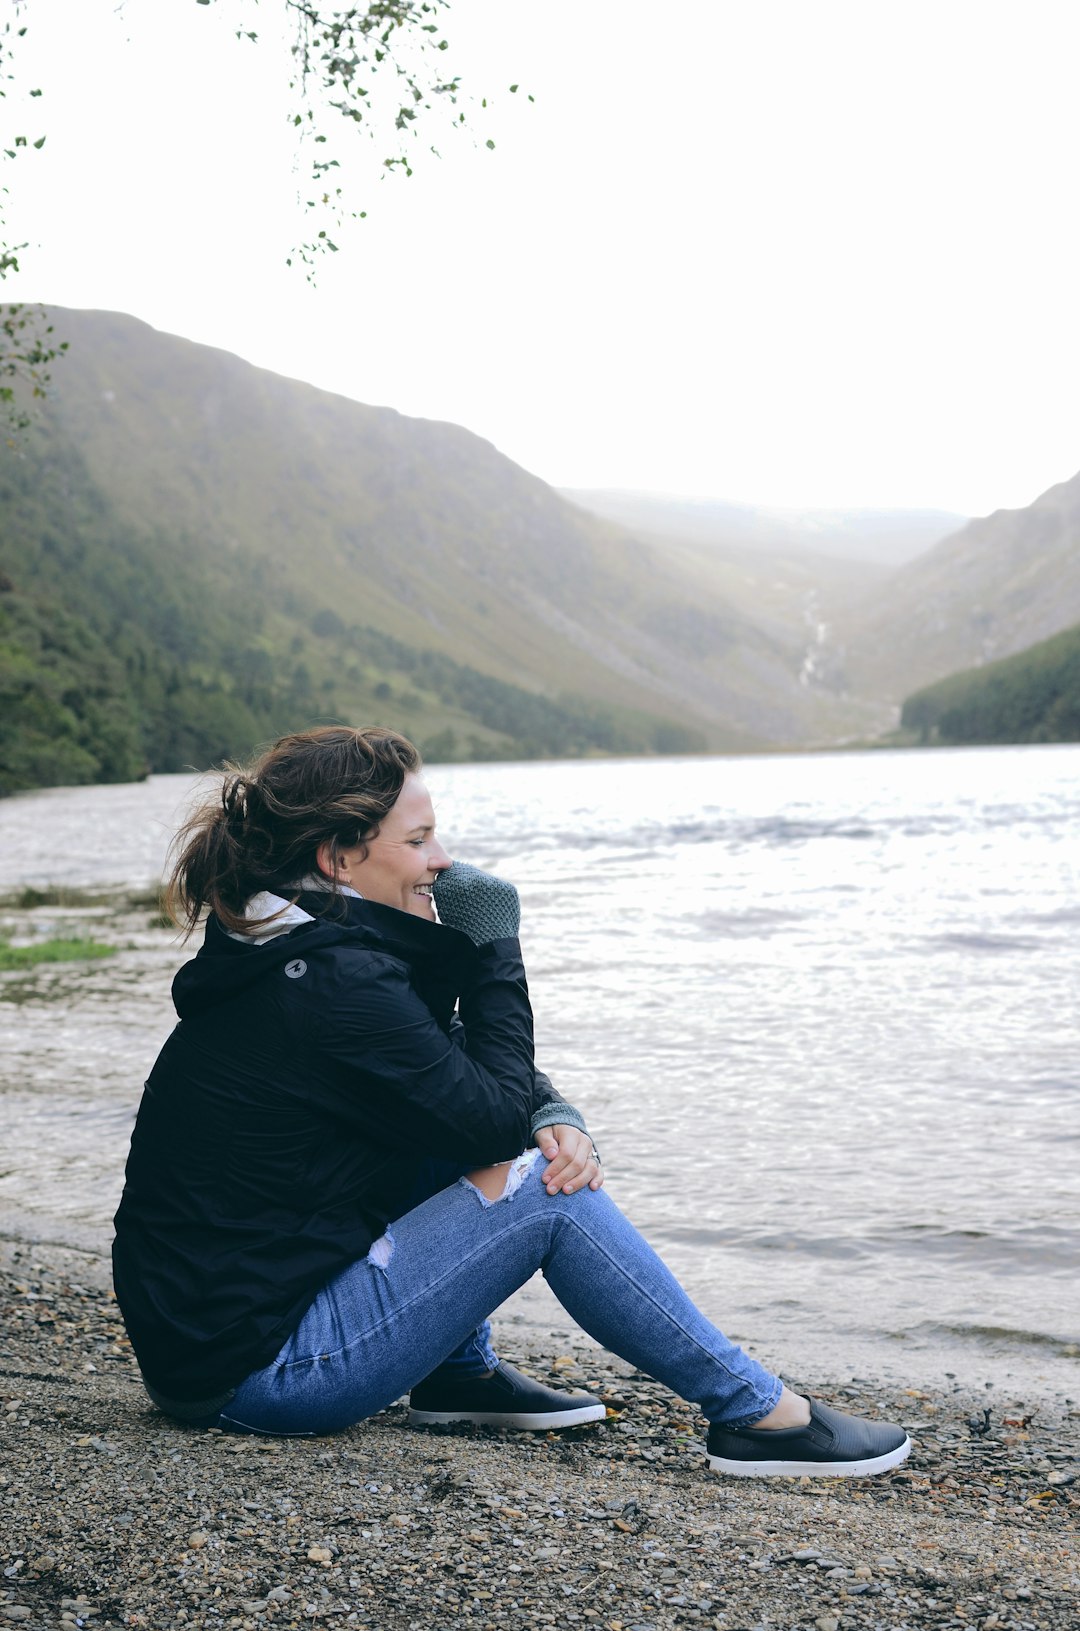 Travel Tips and Stories of Glendalough in Ireland